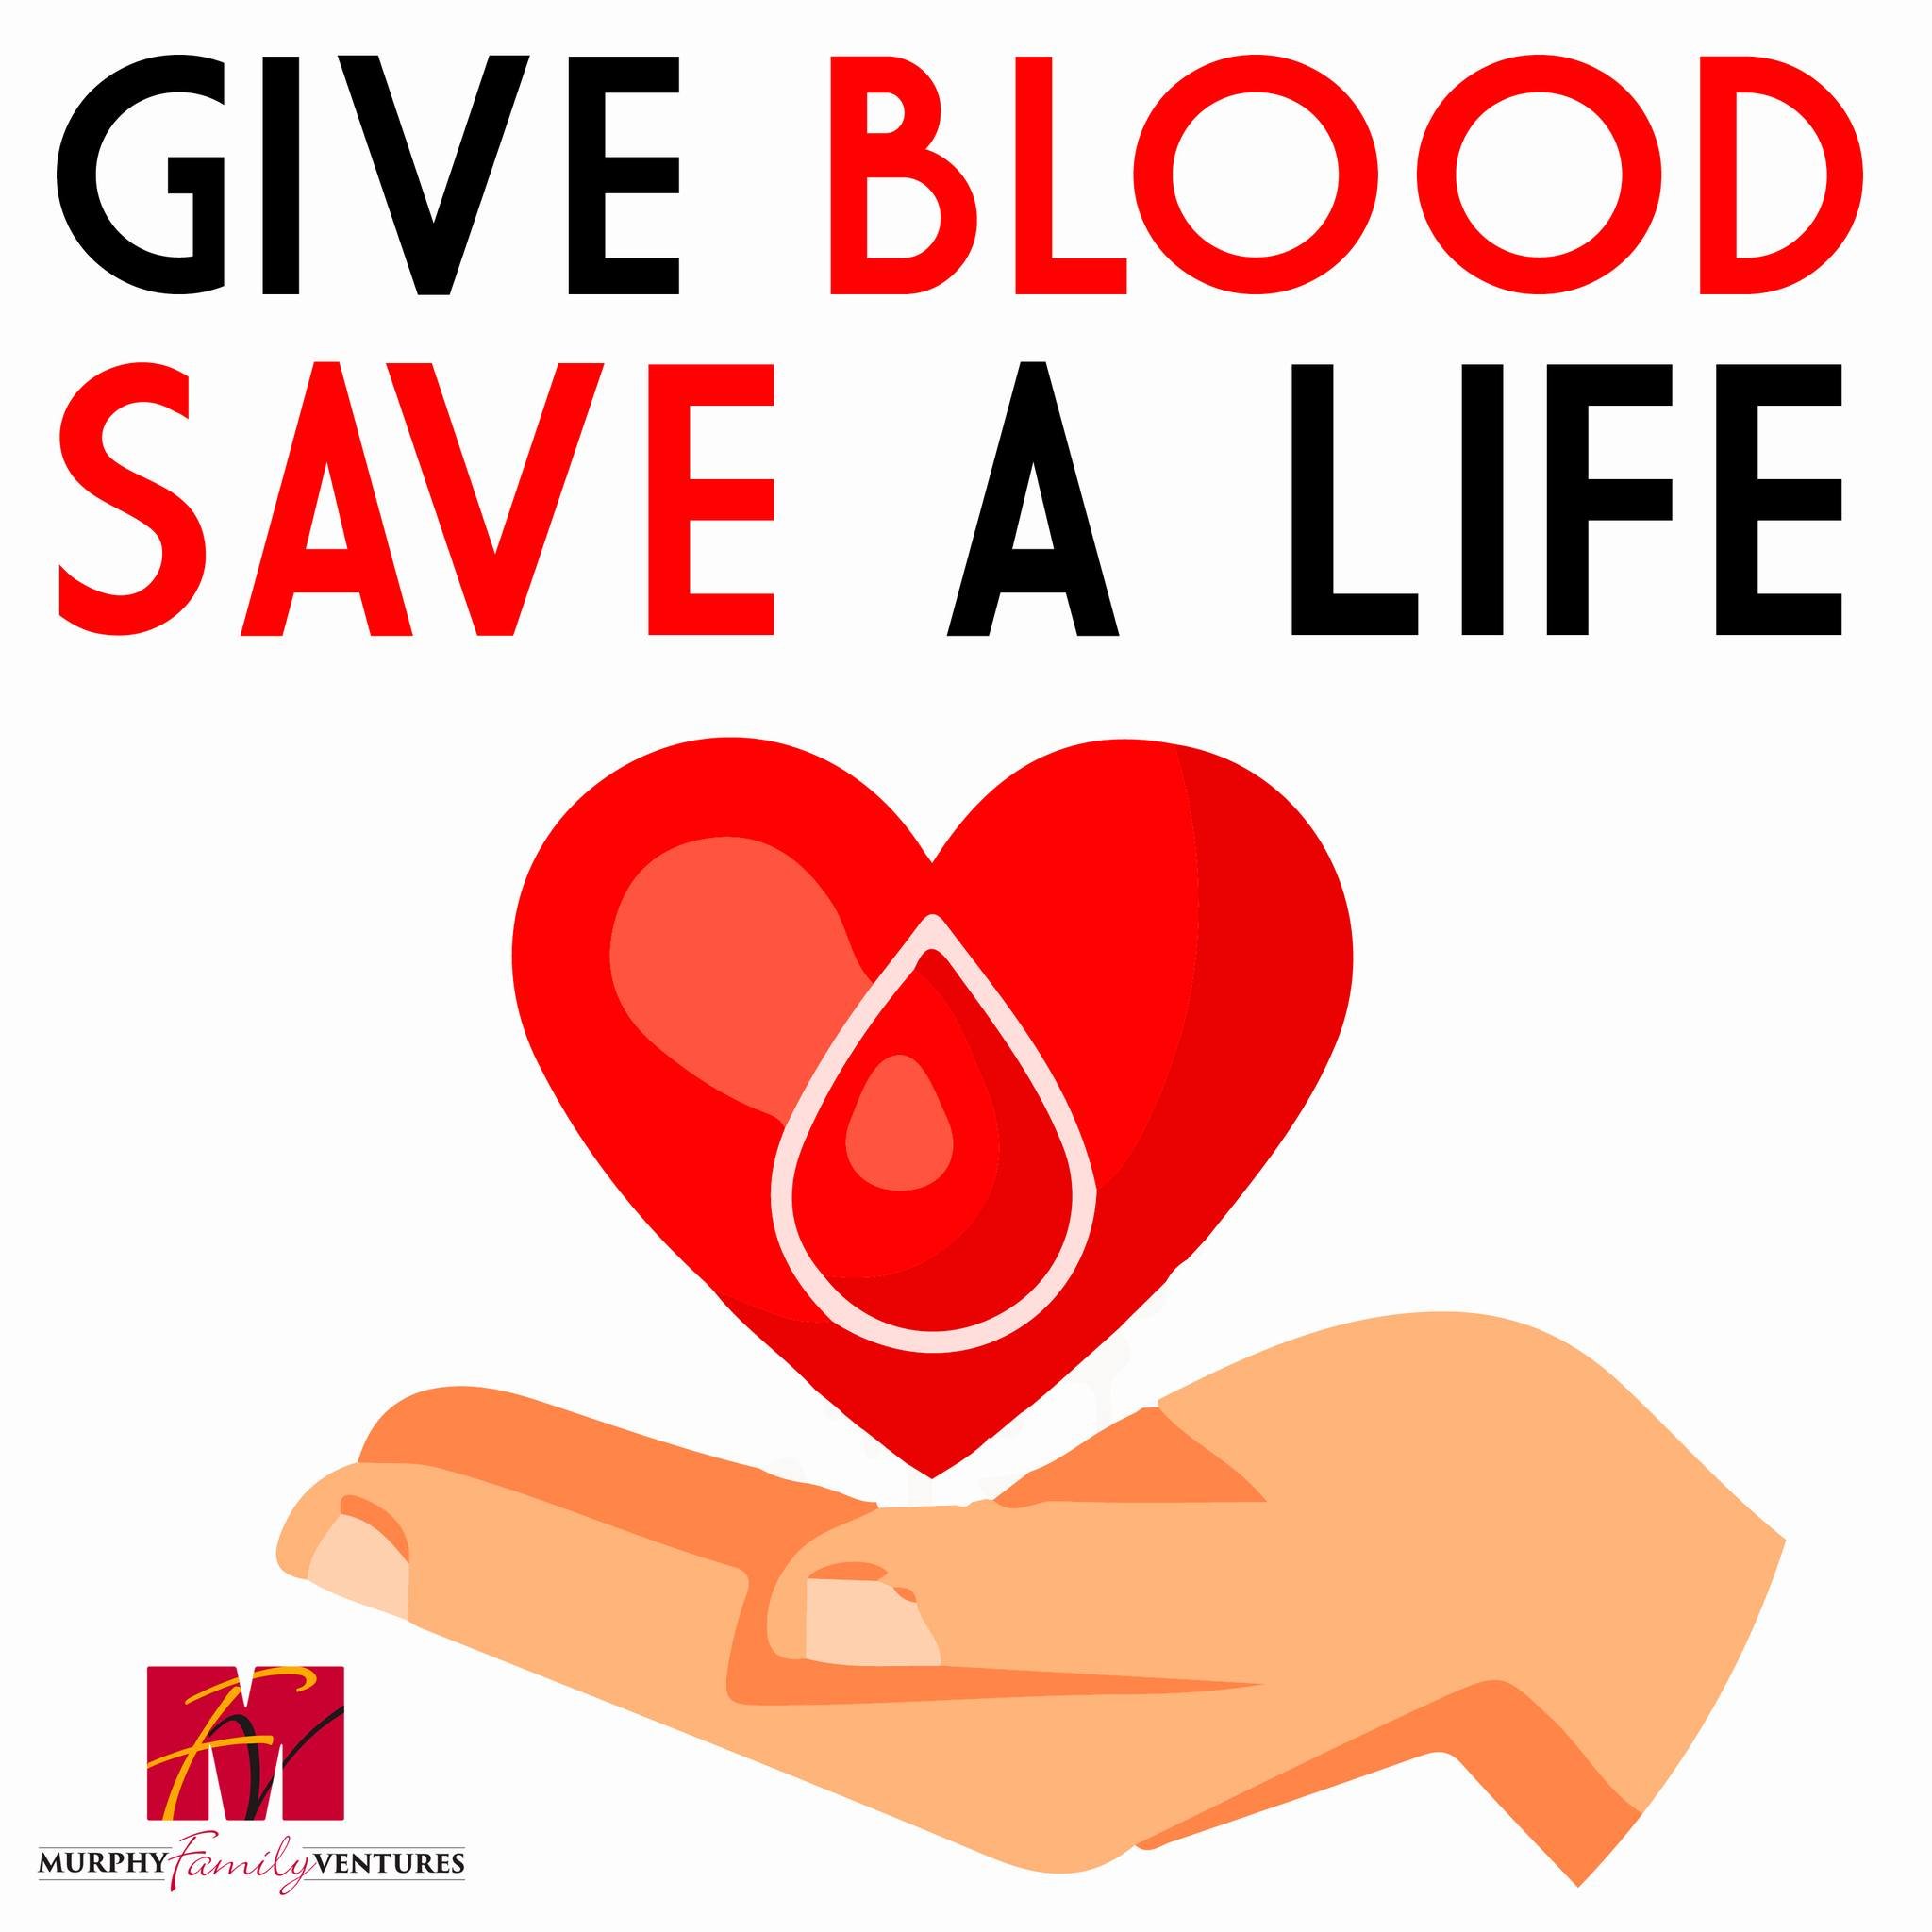 Every drop counts!🩸 Murphy Family Ventures is holding a blood drive on June 6th from 10am - 2pm at the MFV Corporate Office in Wallace. To schedule an appointment, please visit www.redcrossblood.org or call 1-800-RED-CROSS and use the sponsor code &